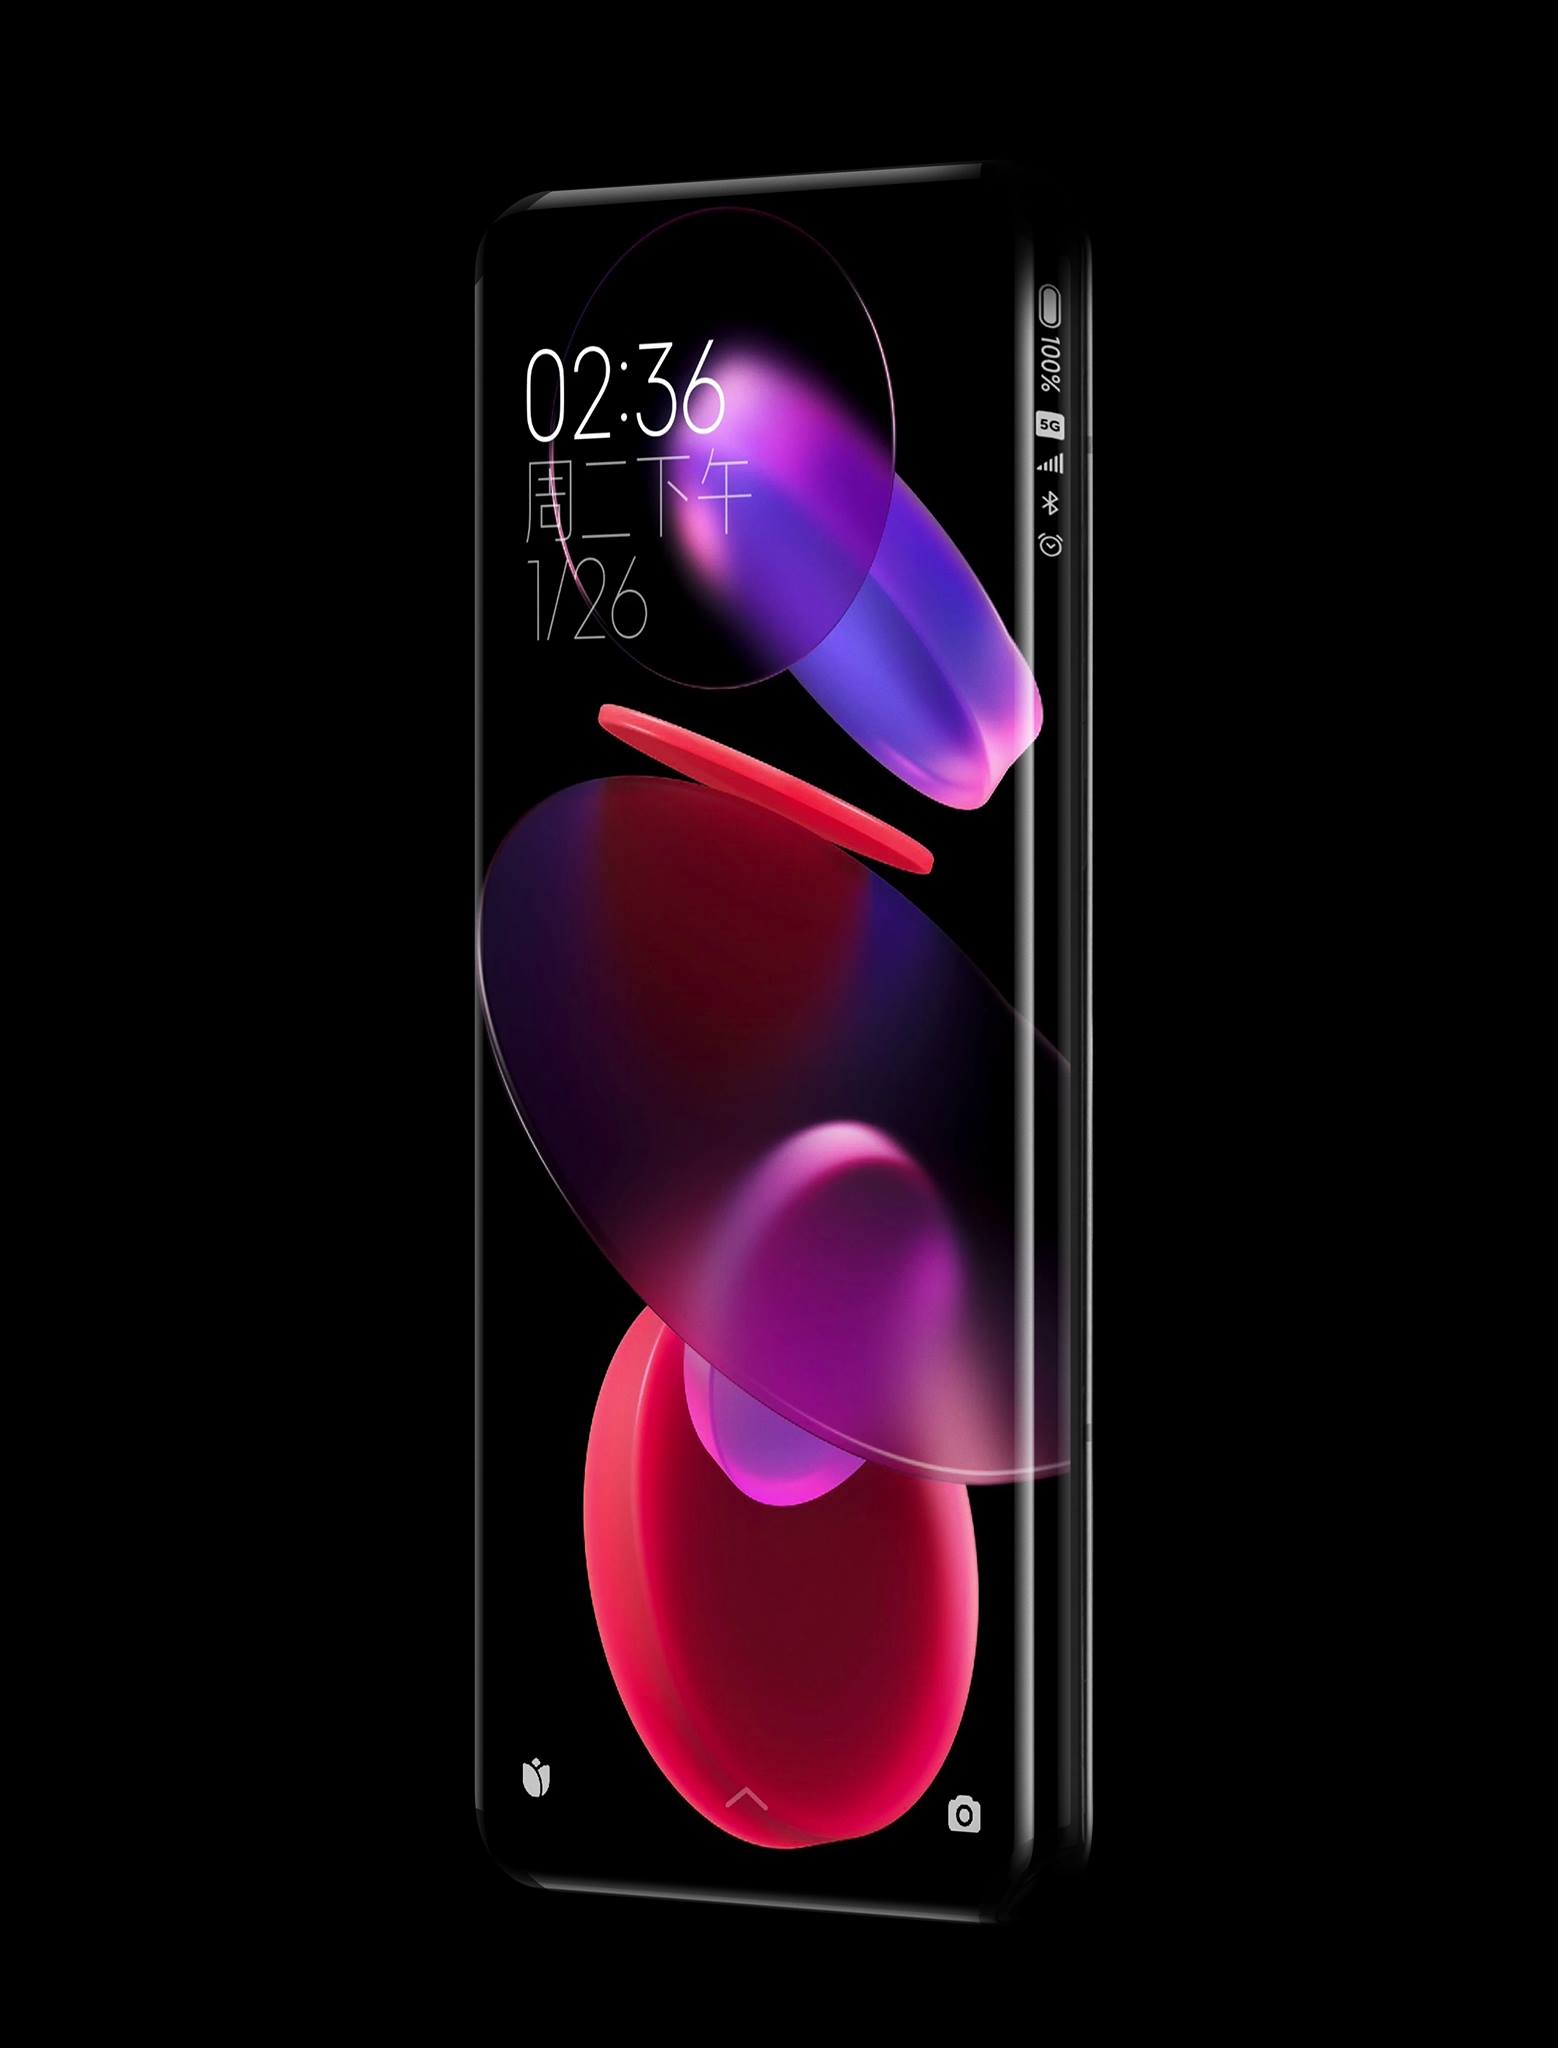 , Quad Curved Waterfall Display: Το απίστευτο concept smartphone της Xiaomi